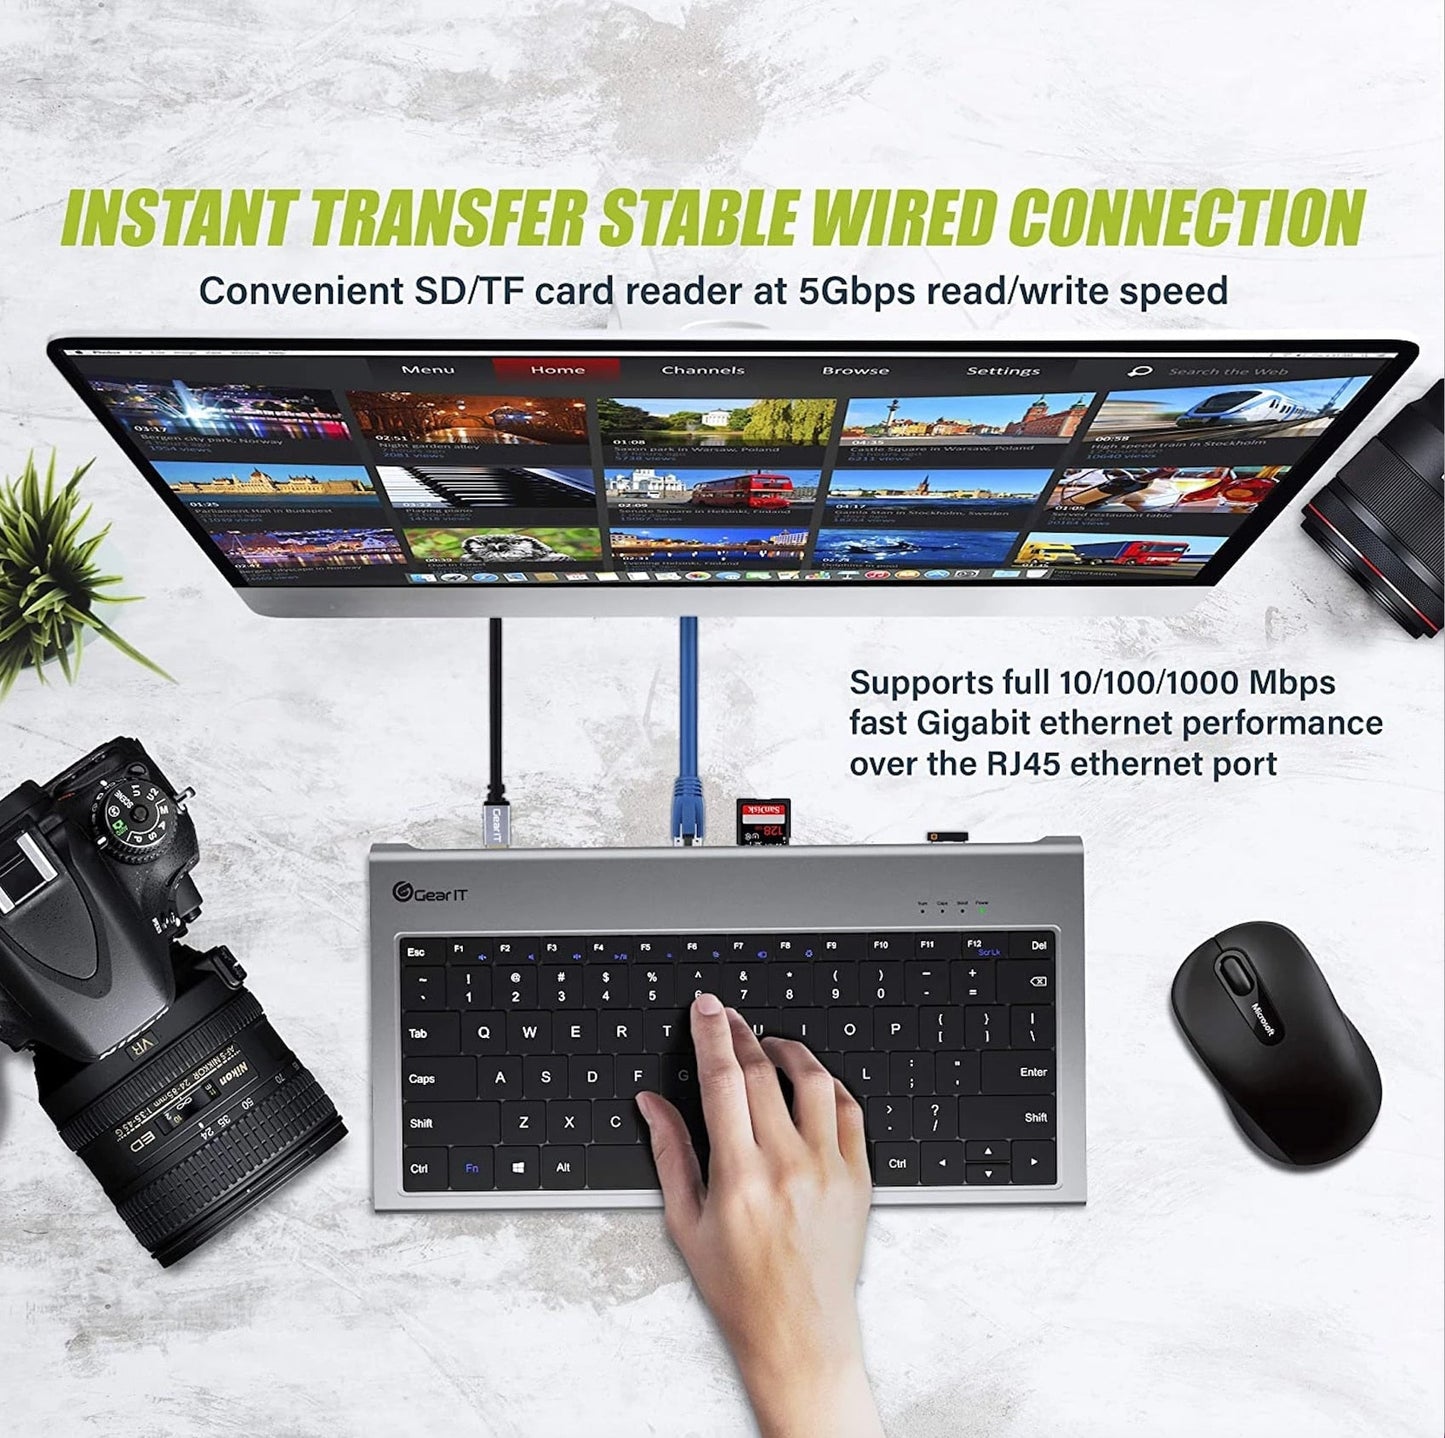 Multi Usb 11-IN-1 Docking Station With Keyboard